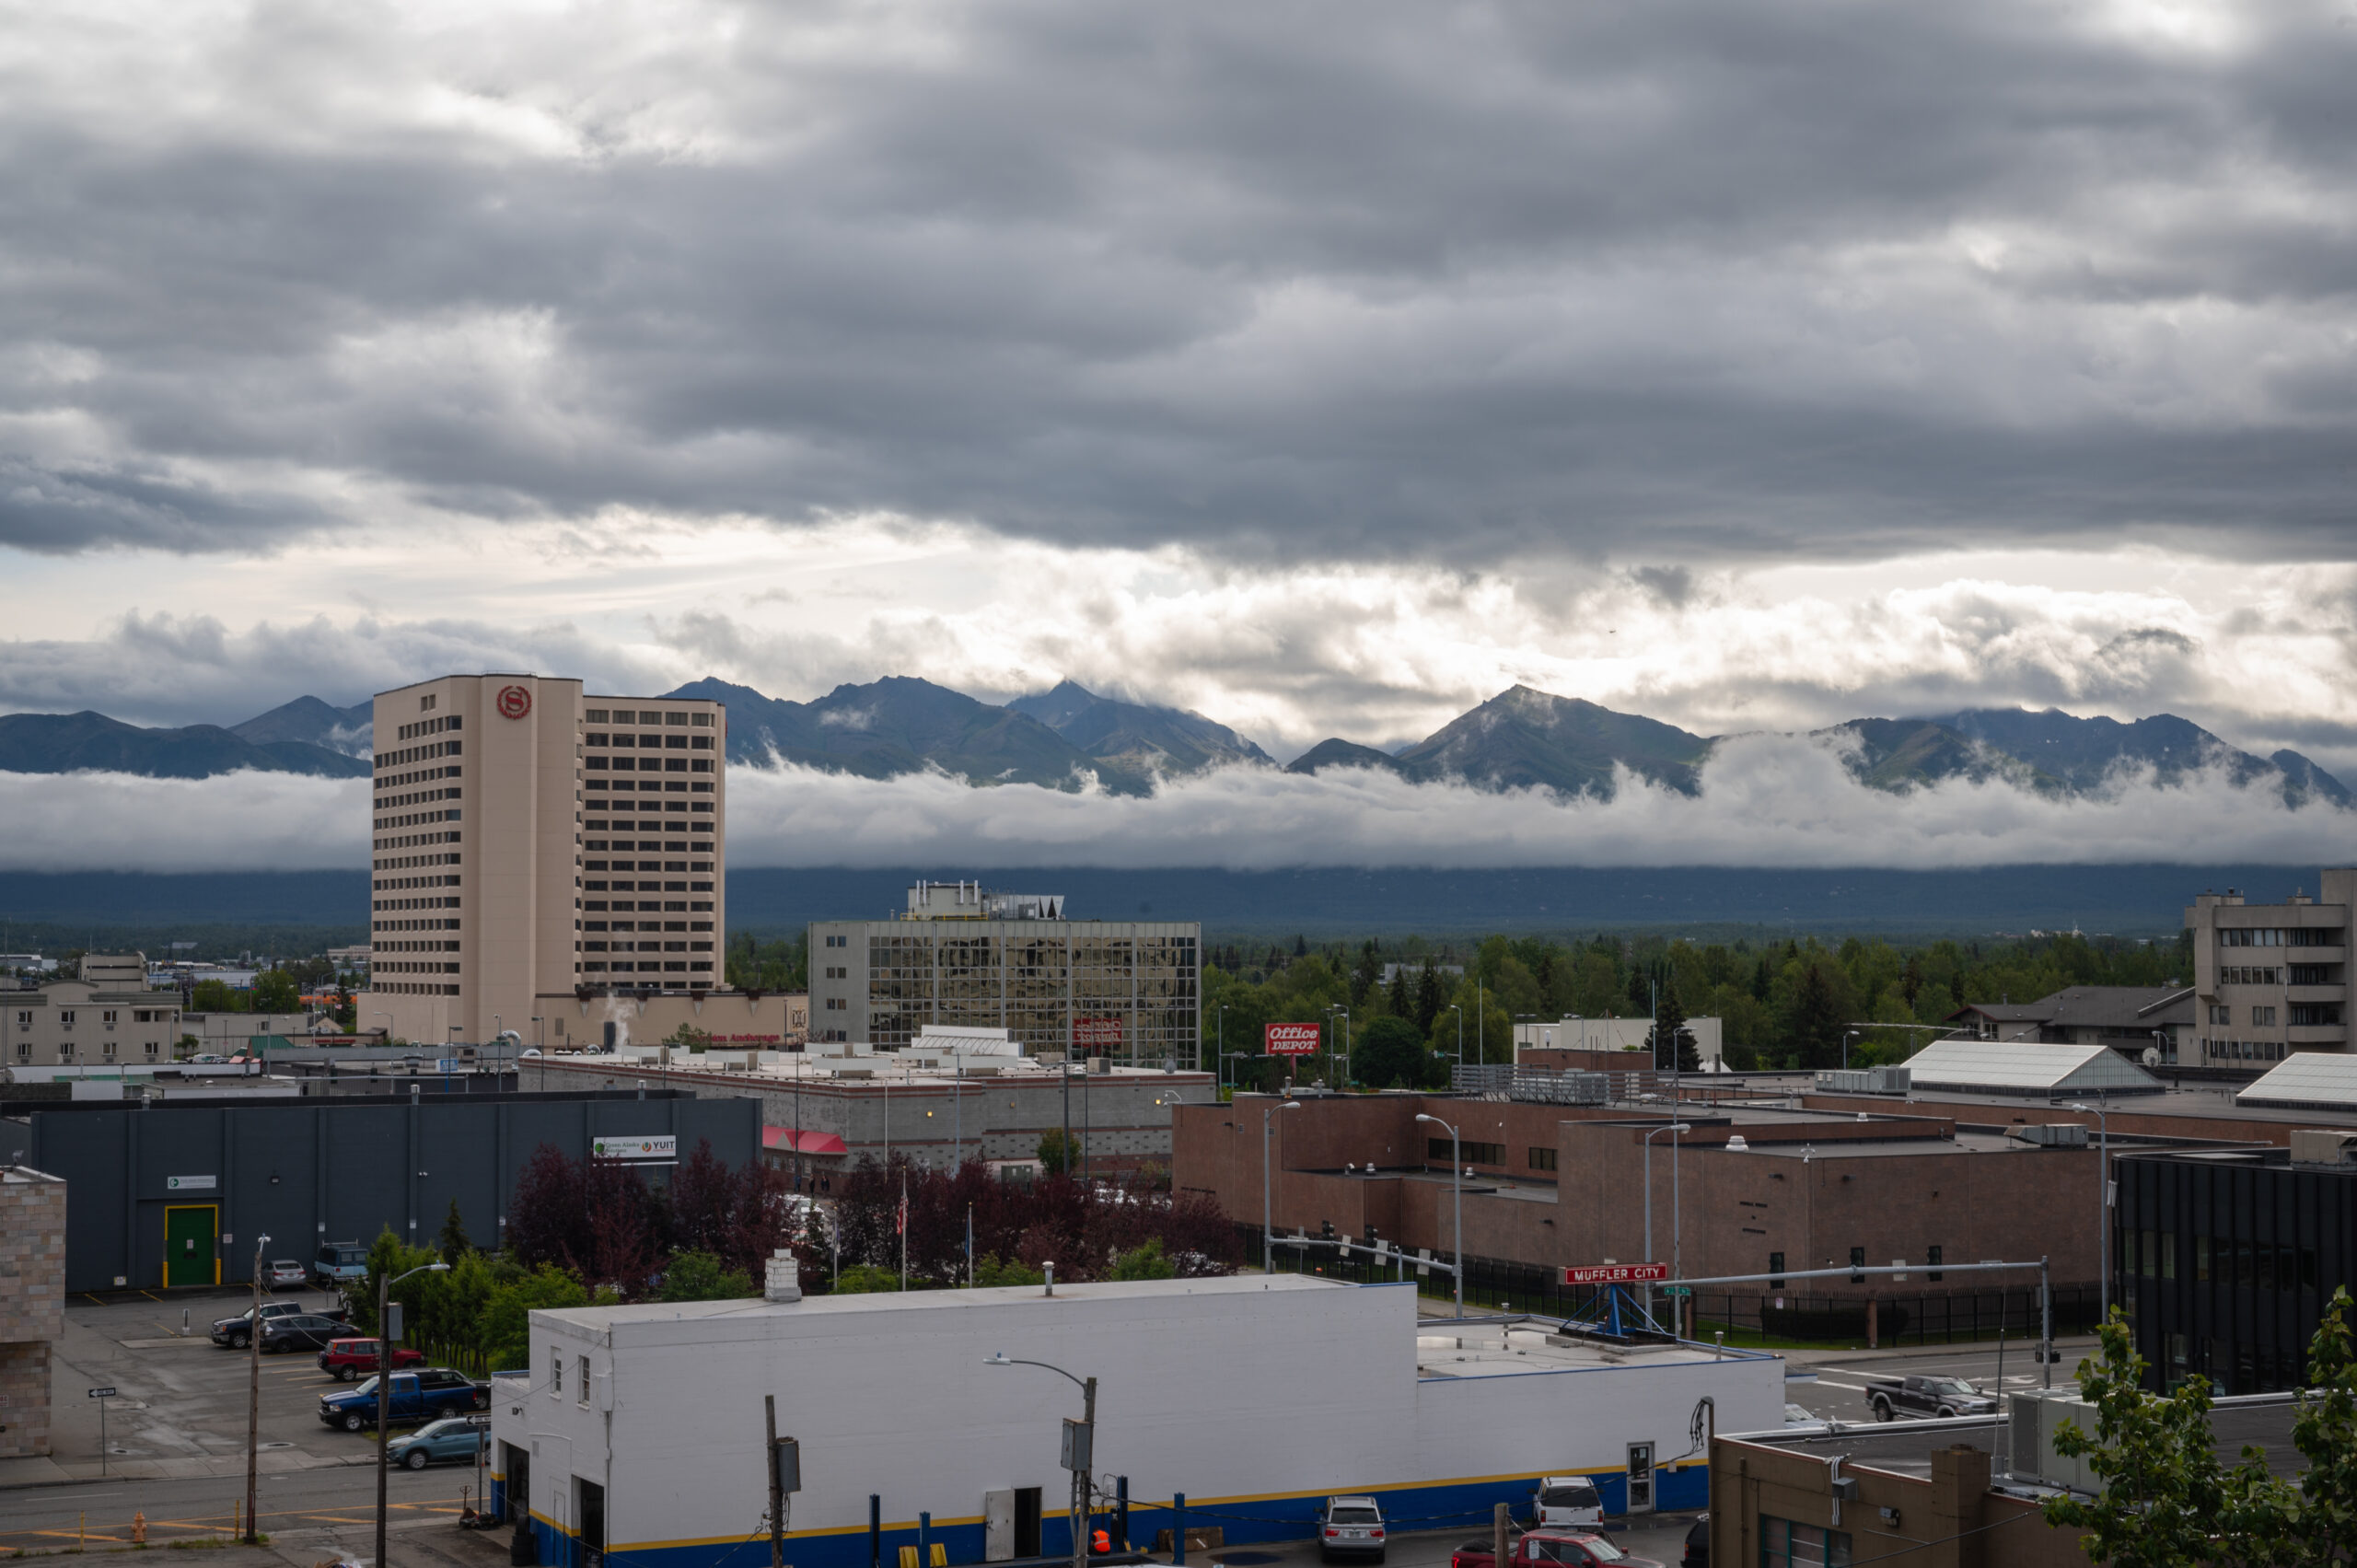 The Anchorage Skyline with rainy clouds and the Sheraton Hotel.